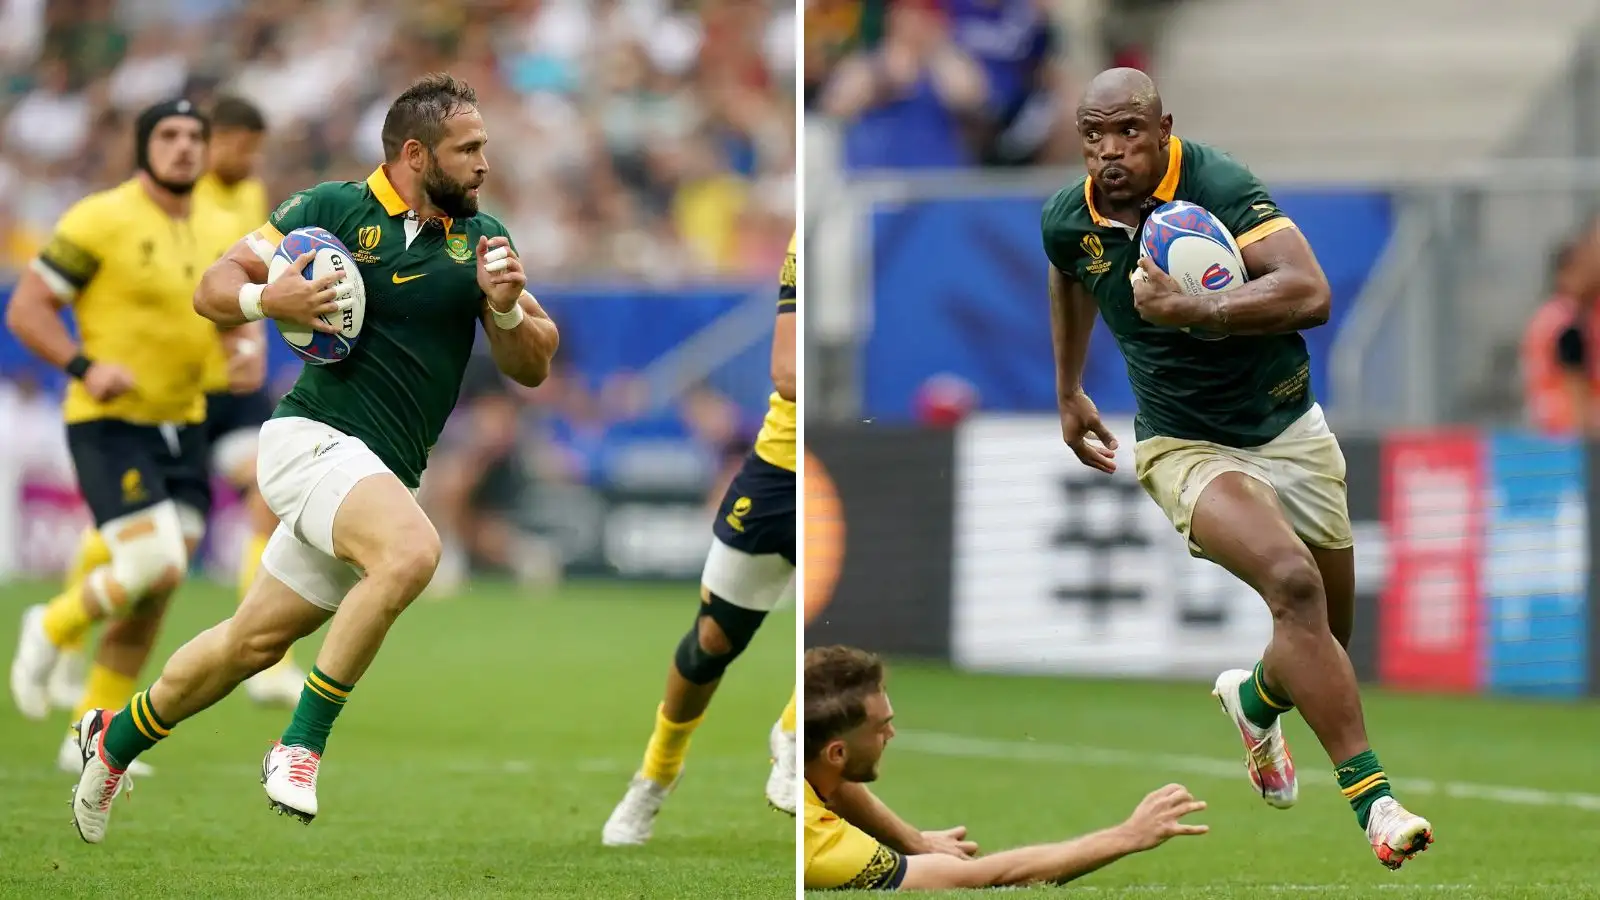 Springboks Cobus Reinach and Makazole Mapimpi in action during the Rugby World Cup match against Romania